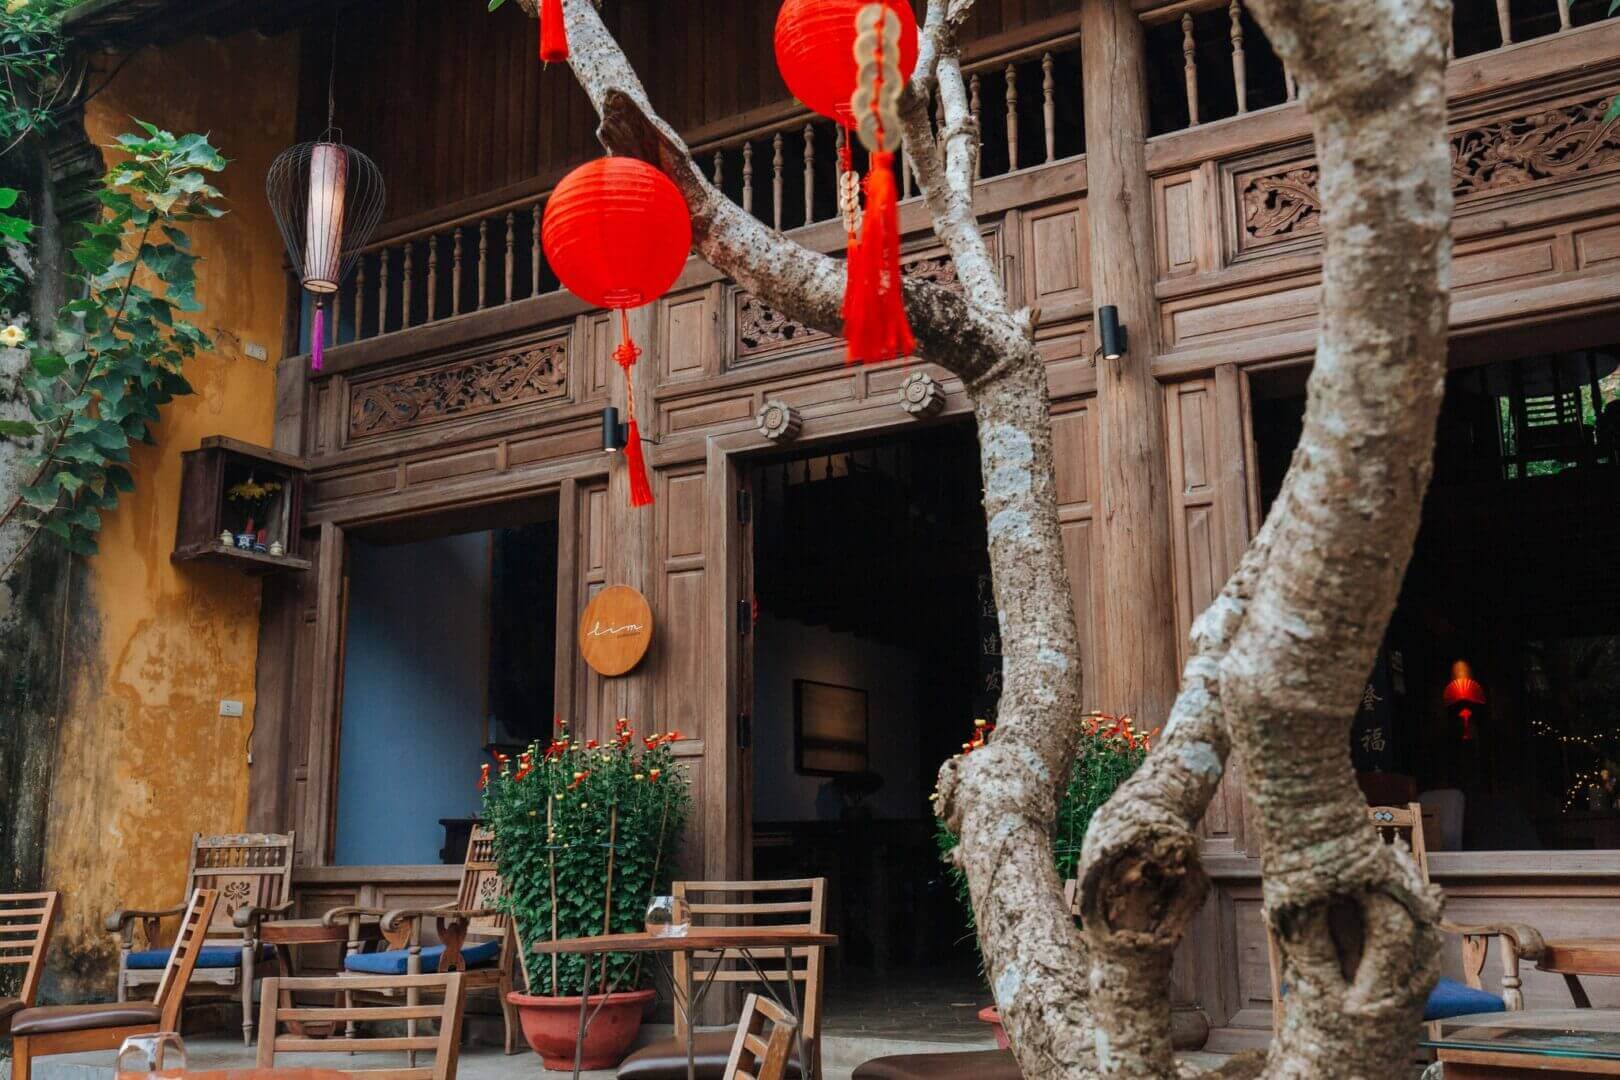 Lim dining room in Hoi An